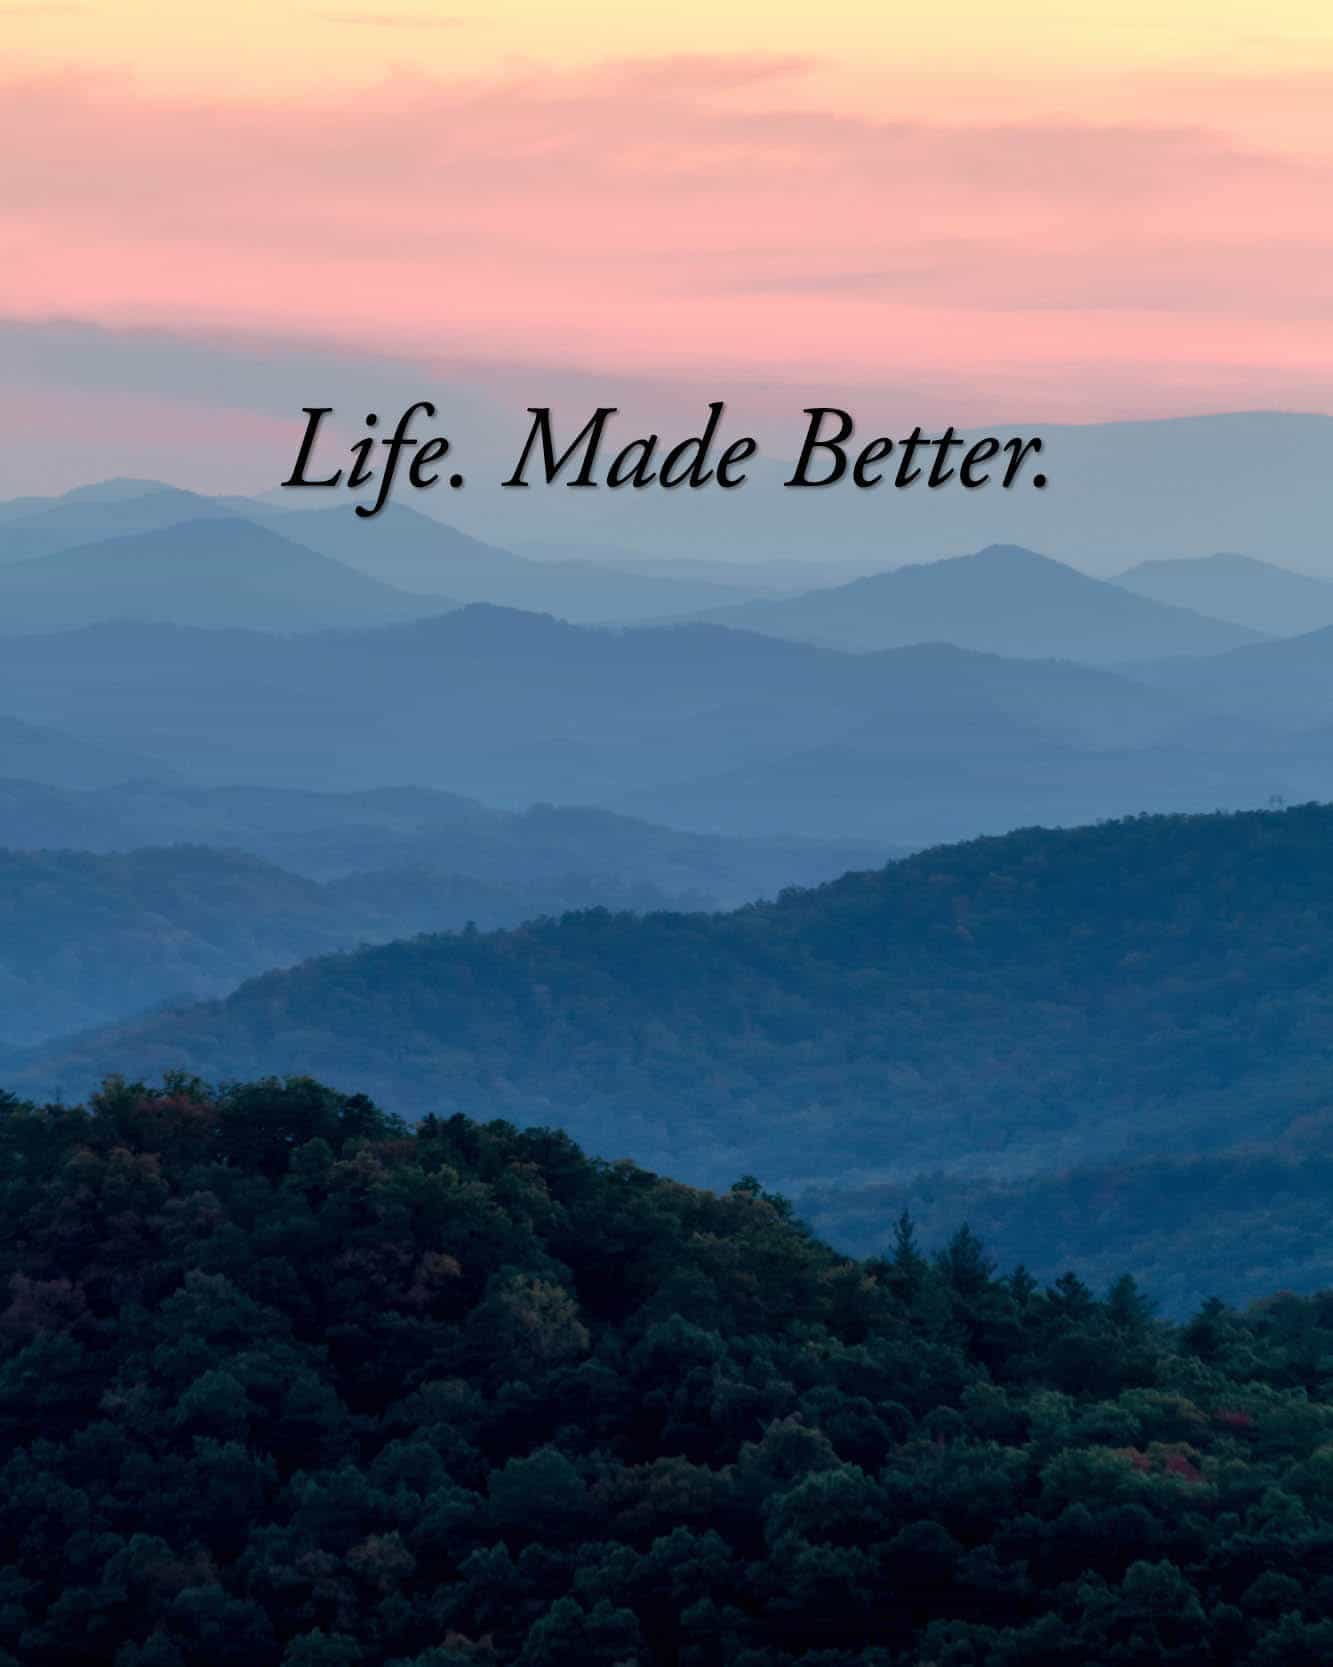 "Life made Better"  is written in front of scenic mountains. 